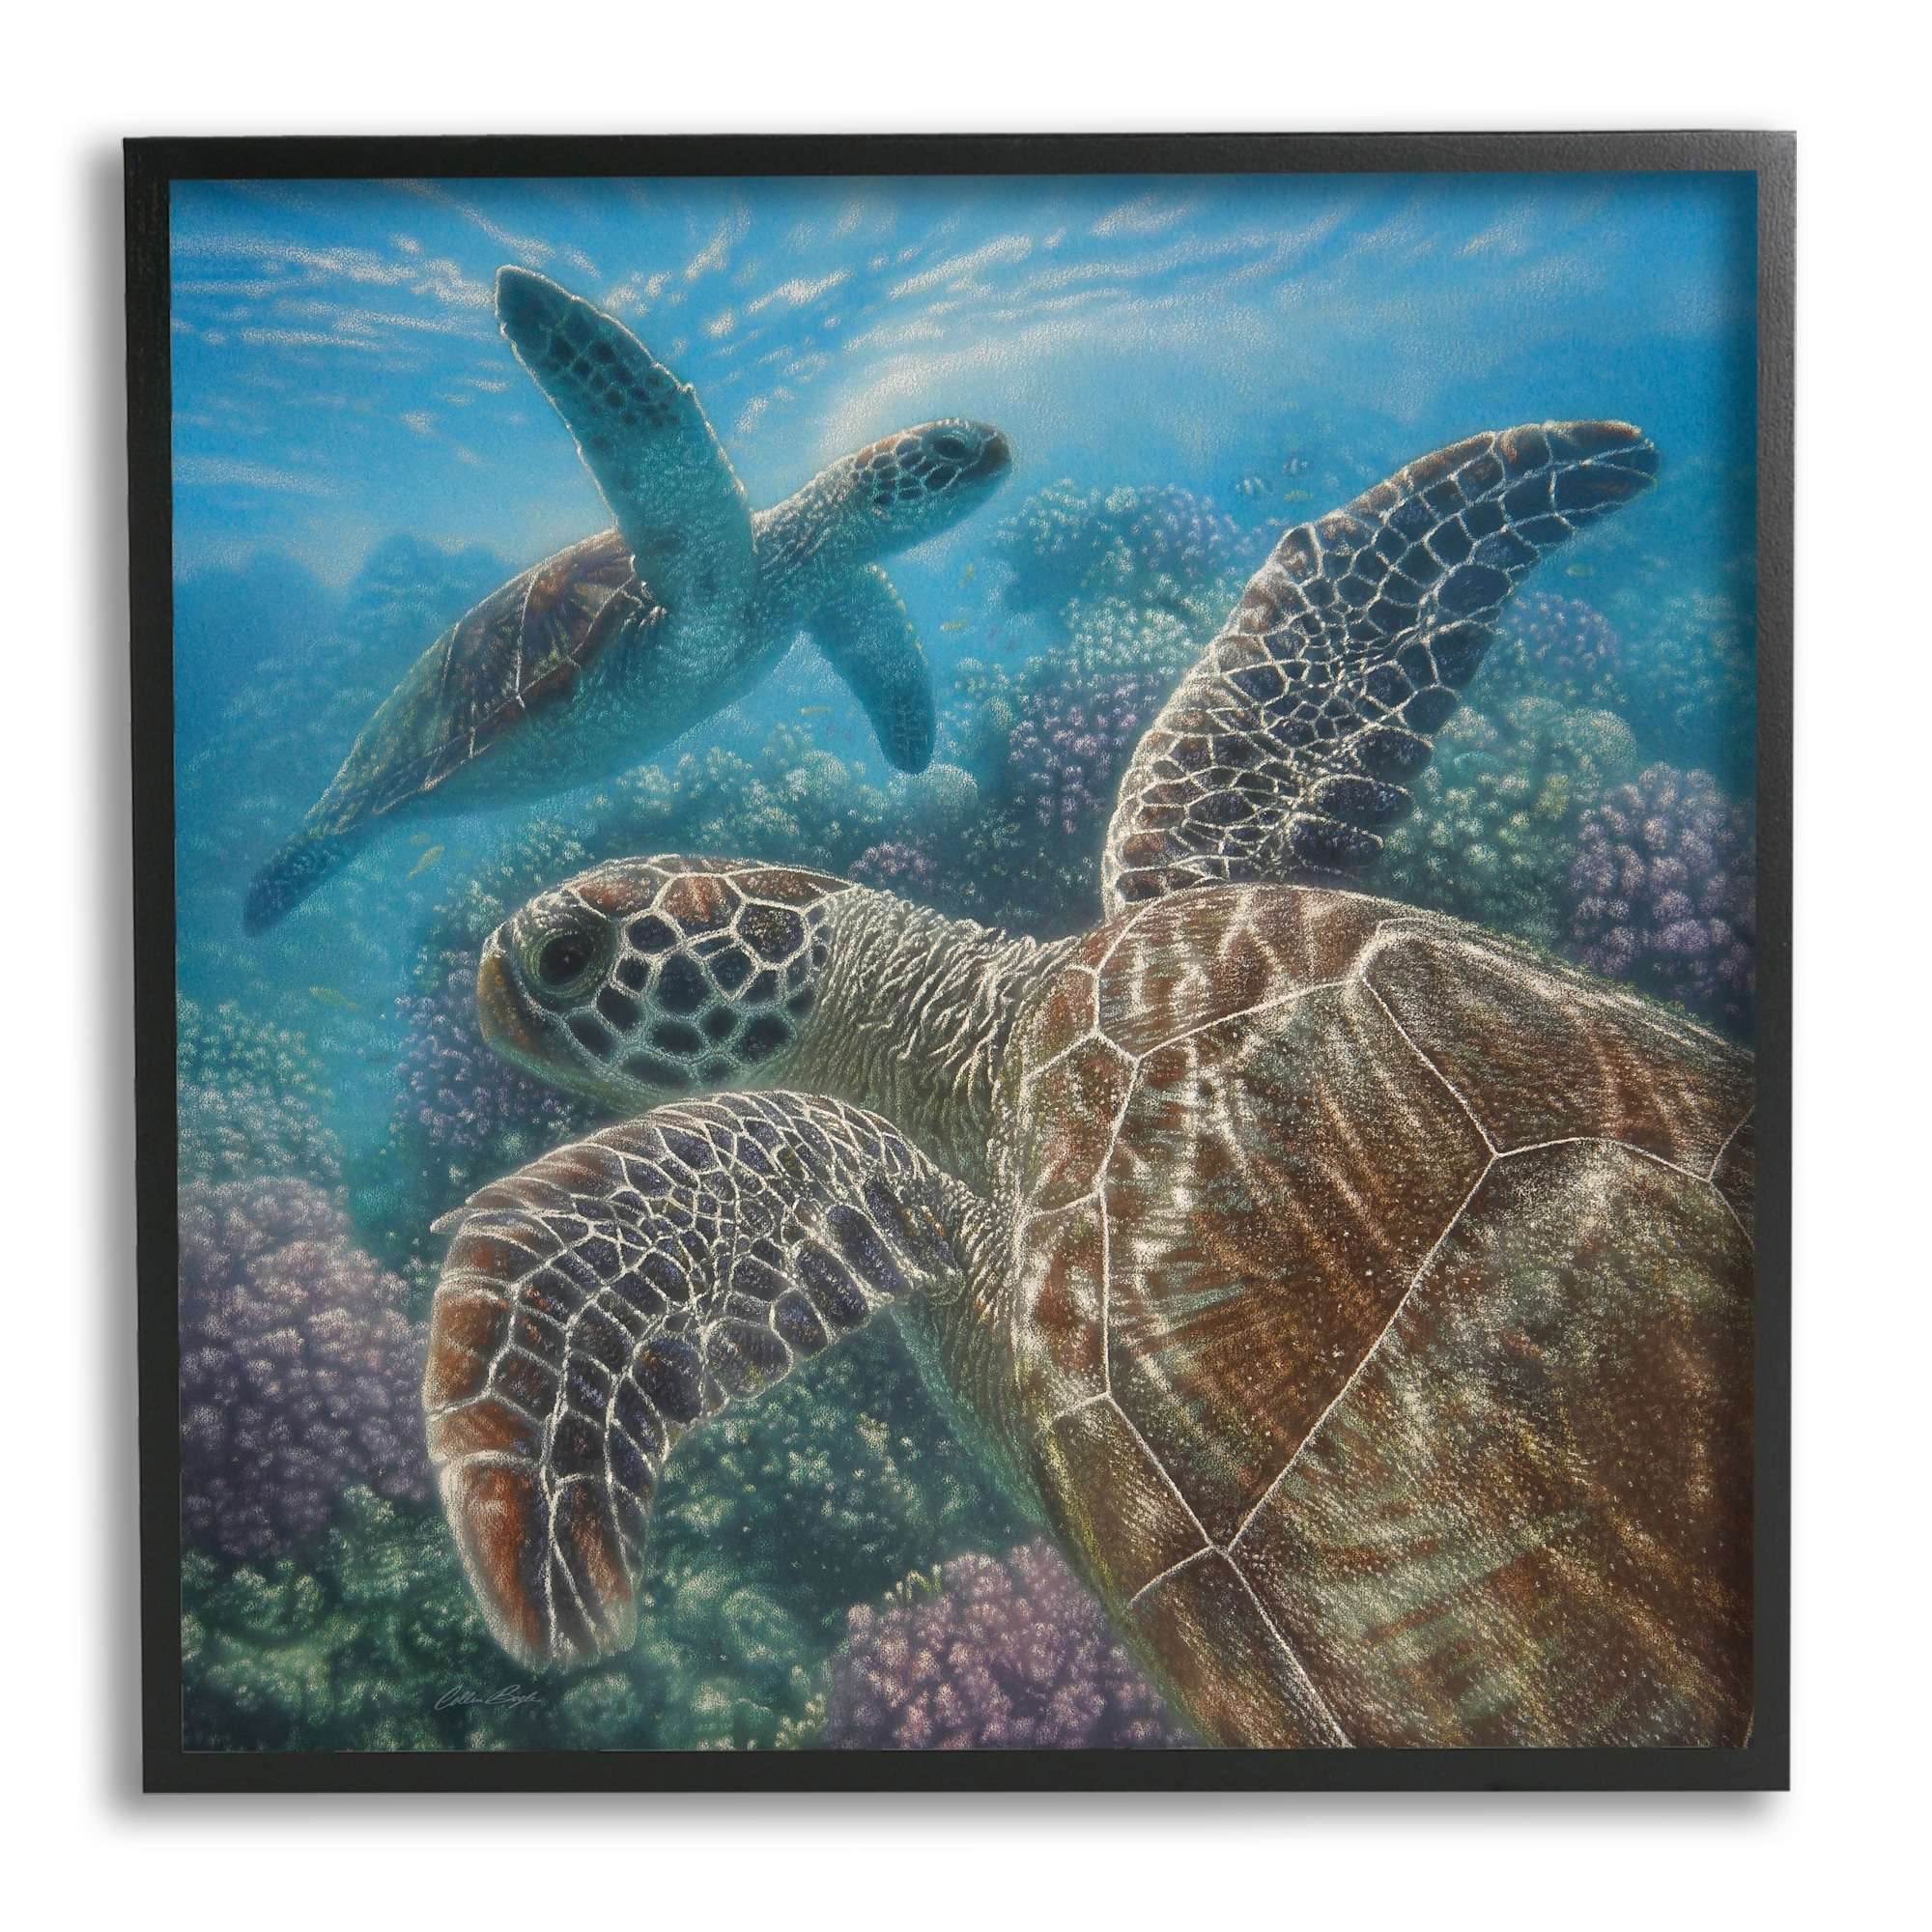 Ideal To Match Sea Turtle Quilts & Bedspreads. Sea Turtle Designs Lampshades 